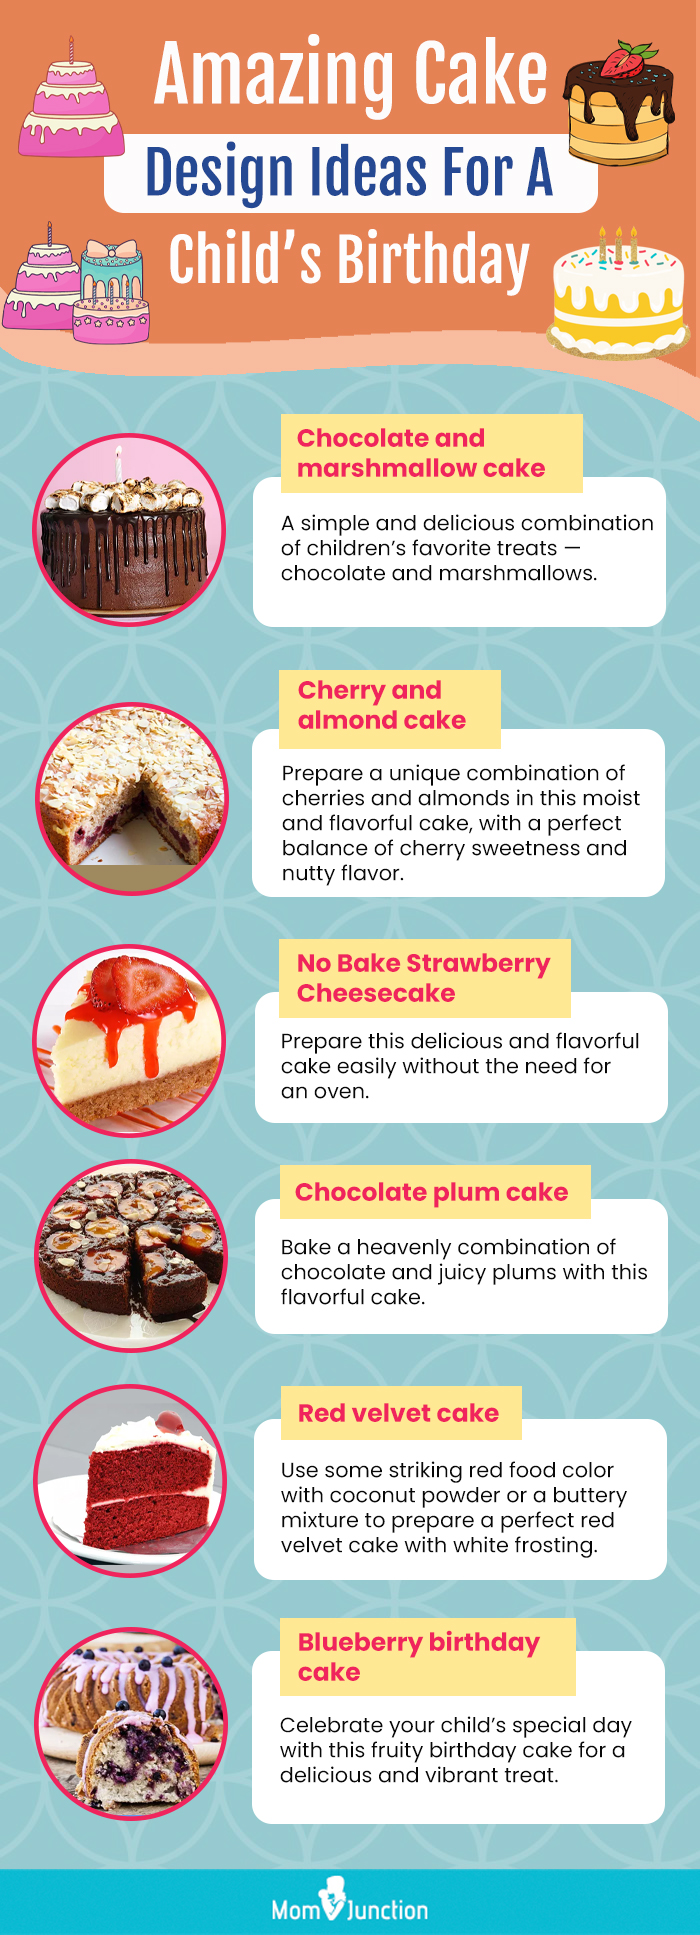 amazing cake design ideas for a childs birthday (infographic)